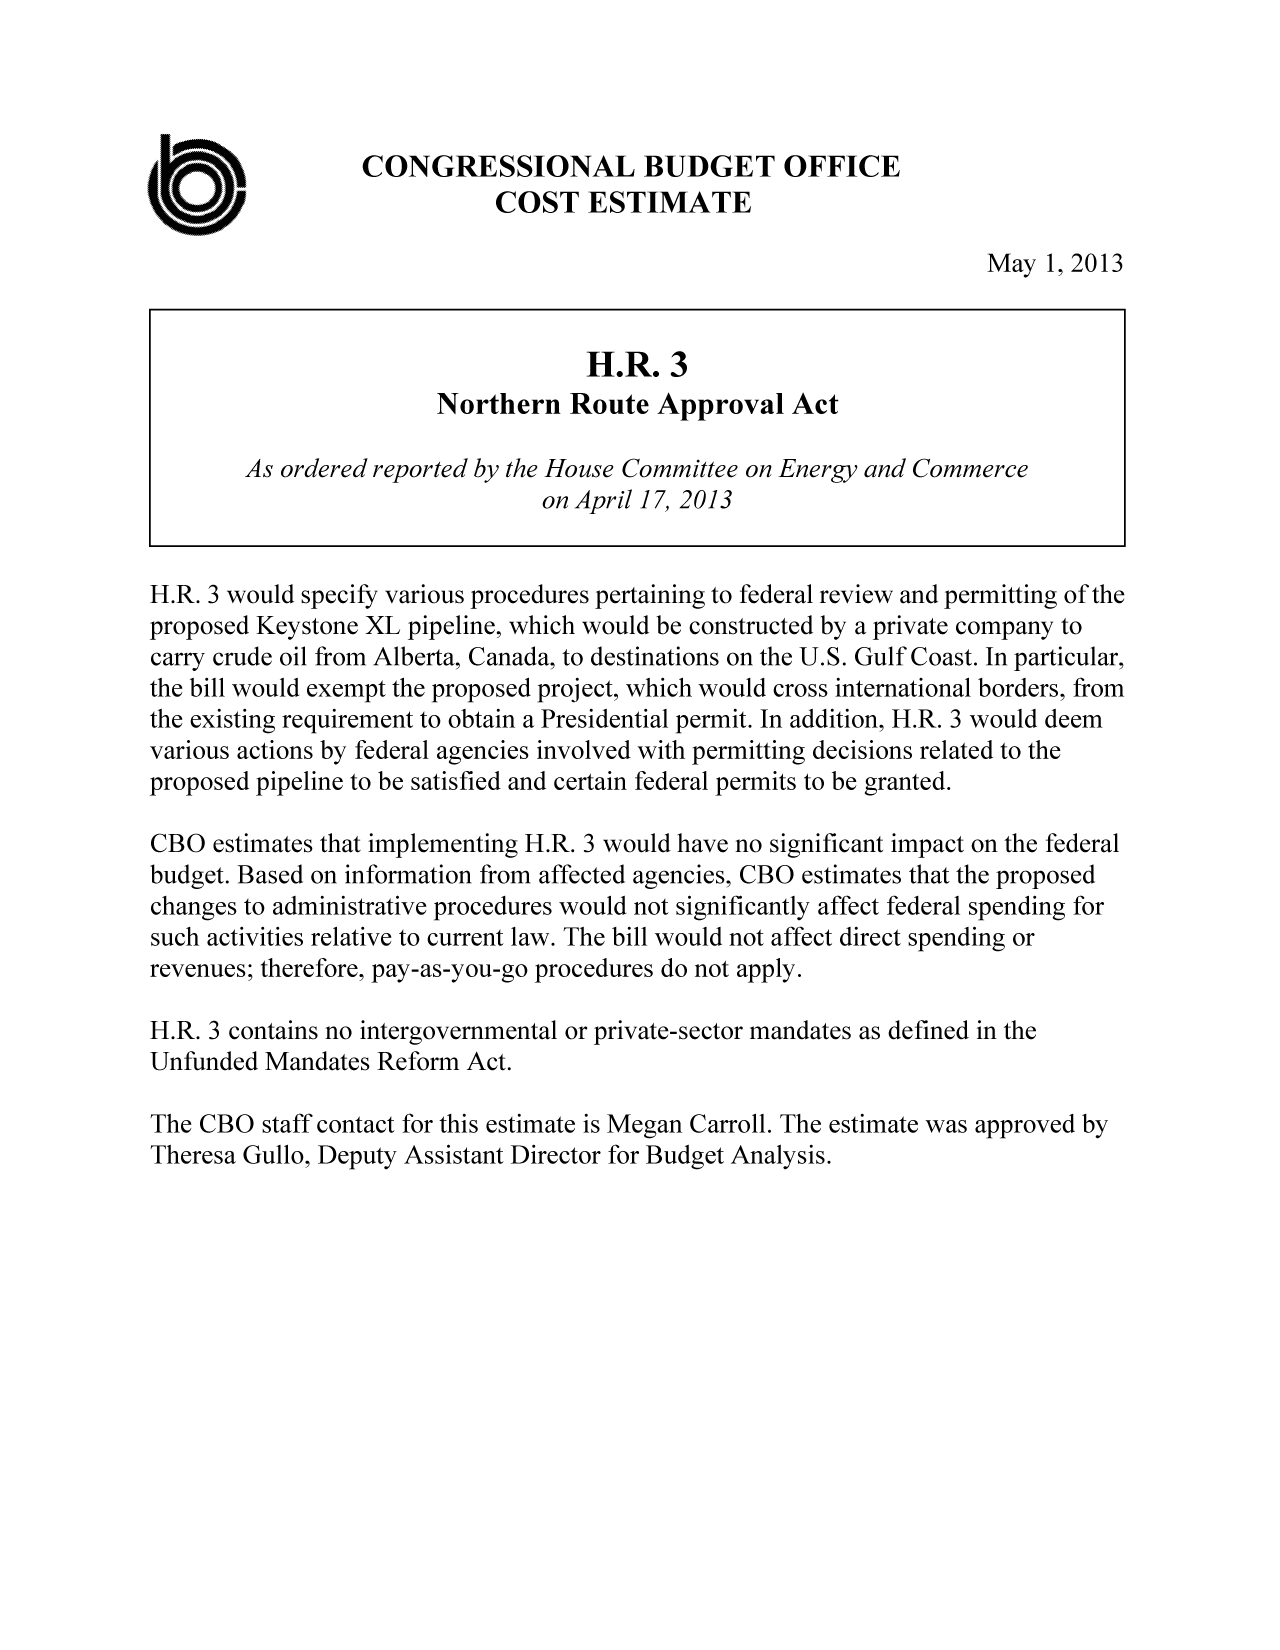 handle is hein.congrec/cbo11052 and id is 1 raw text is: CONGRESSIONAL BUDGET OFFICE
COST ESTIMATE
May 1, 2013
H.R. 3
Northern Route Approval Act
As ordered reported by the House Committee on Energy and Commerce
on April 17, 2013
H.R. 3 would specify various procedures pertaining to federal review and permitting of the
proposed Keystone XL pipeline, which would be constructed by a private company to
carry crude oil from Alberta, Canada, to destinations on the U.S. Gulf Coast. In particular,
the bill would exempt the proposed project, which would cross international borders, from
the existing requirement to obtain a Presidential permit. In addition, H.R. 3 would deem
various actions by federal agencies involved with permitting decisions related to the
proposed pipeline to be satisfied and certain federal permits to be granted.
CBO estimates that implementing H.R. 3 would have no significant impact on the federal
budget. Based on information from affected agencies, CBO estimates that the proposed
changes to administrative procedures would not significantly affect federal spending for
such activities relative to current law. The bill would not affect direct spending or
revenues; therefore, pay-as-you-go procedures do not apply.
H.R. 3 contains no intergovernmental or private-sector mandates as defined in the
Unfunded Mandates Reform Act.
The CBO staff contact for this estimate is Megan Carroll. The estimate was approved by
Theresa Gullo, Deputy Assistant Director for Budget Analysis.


